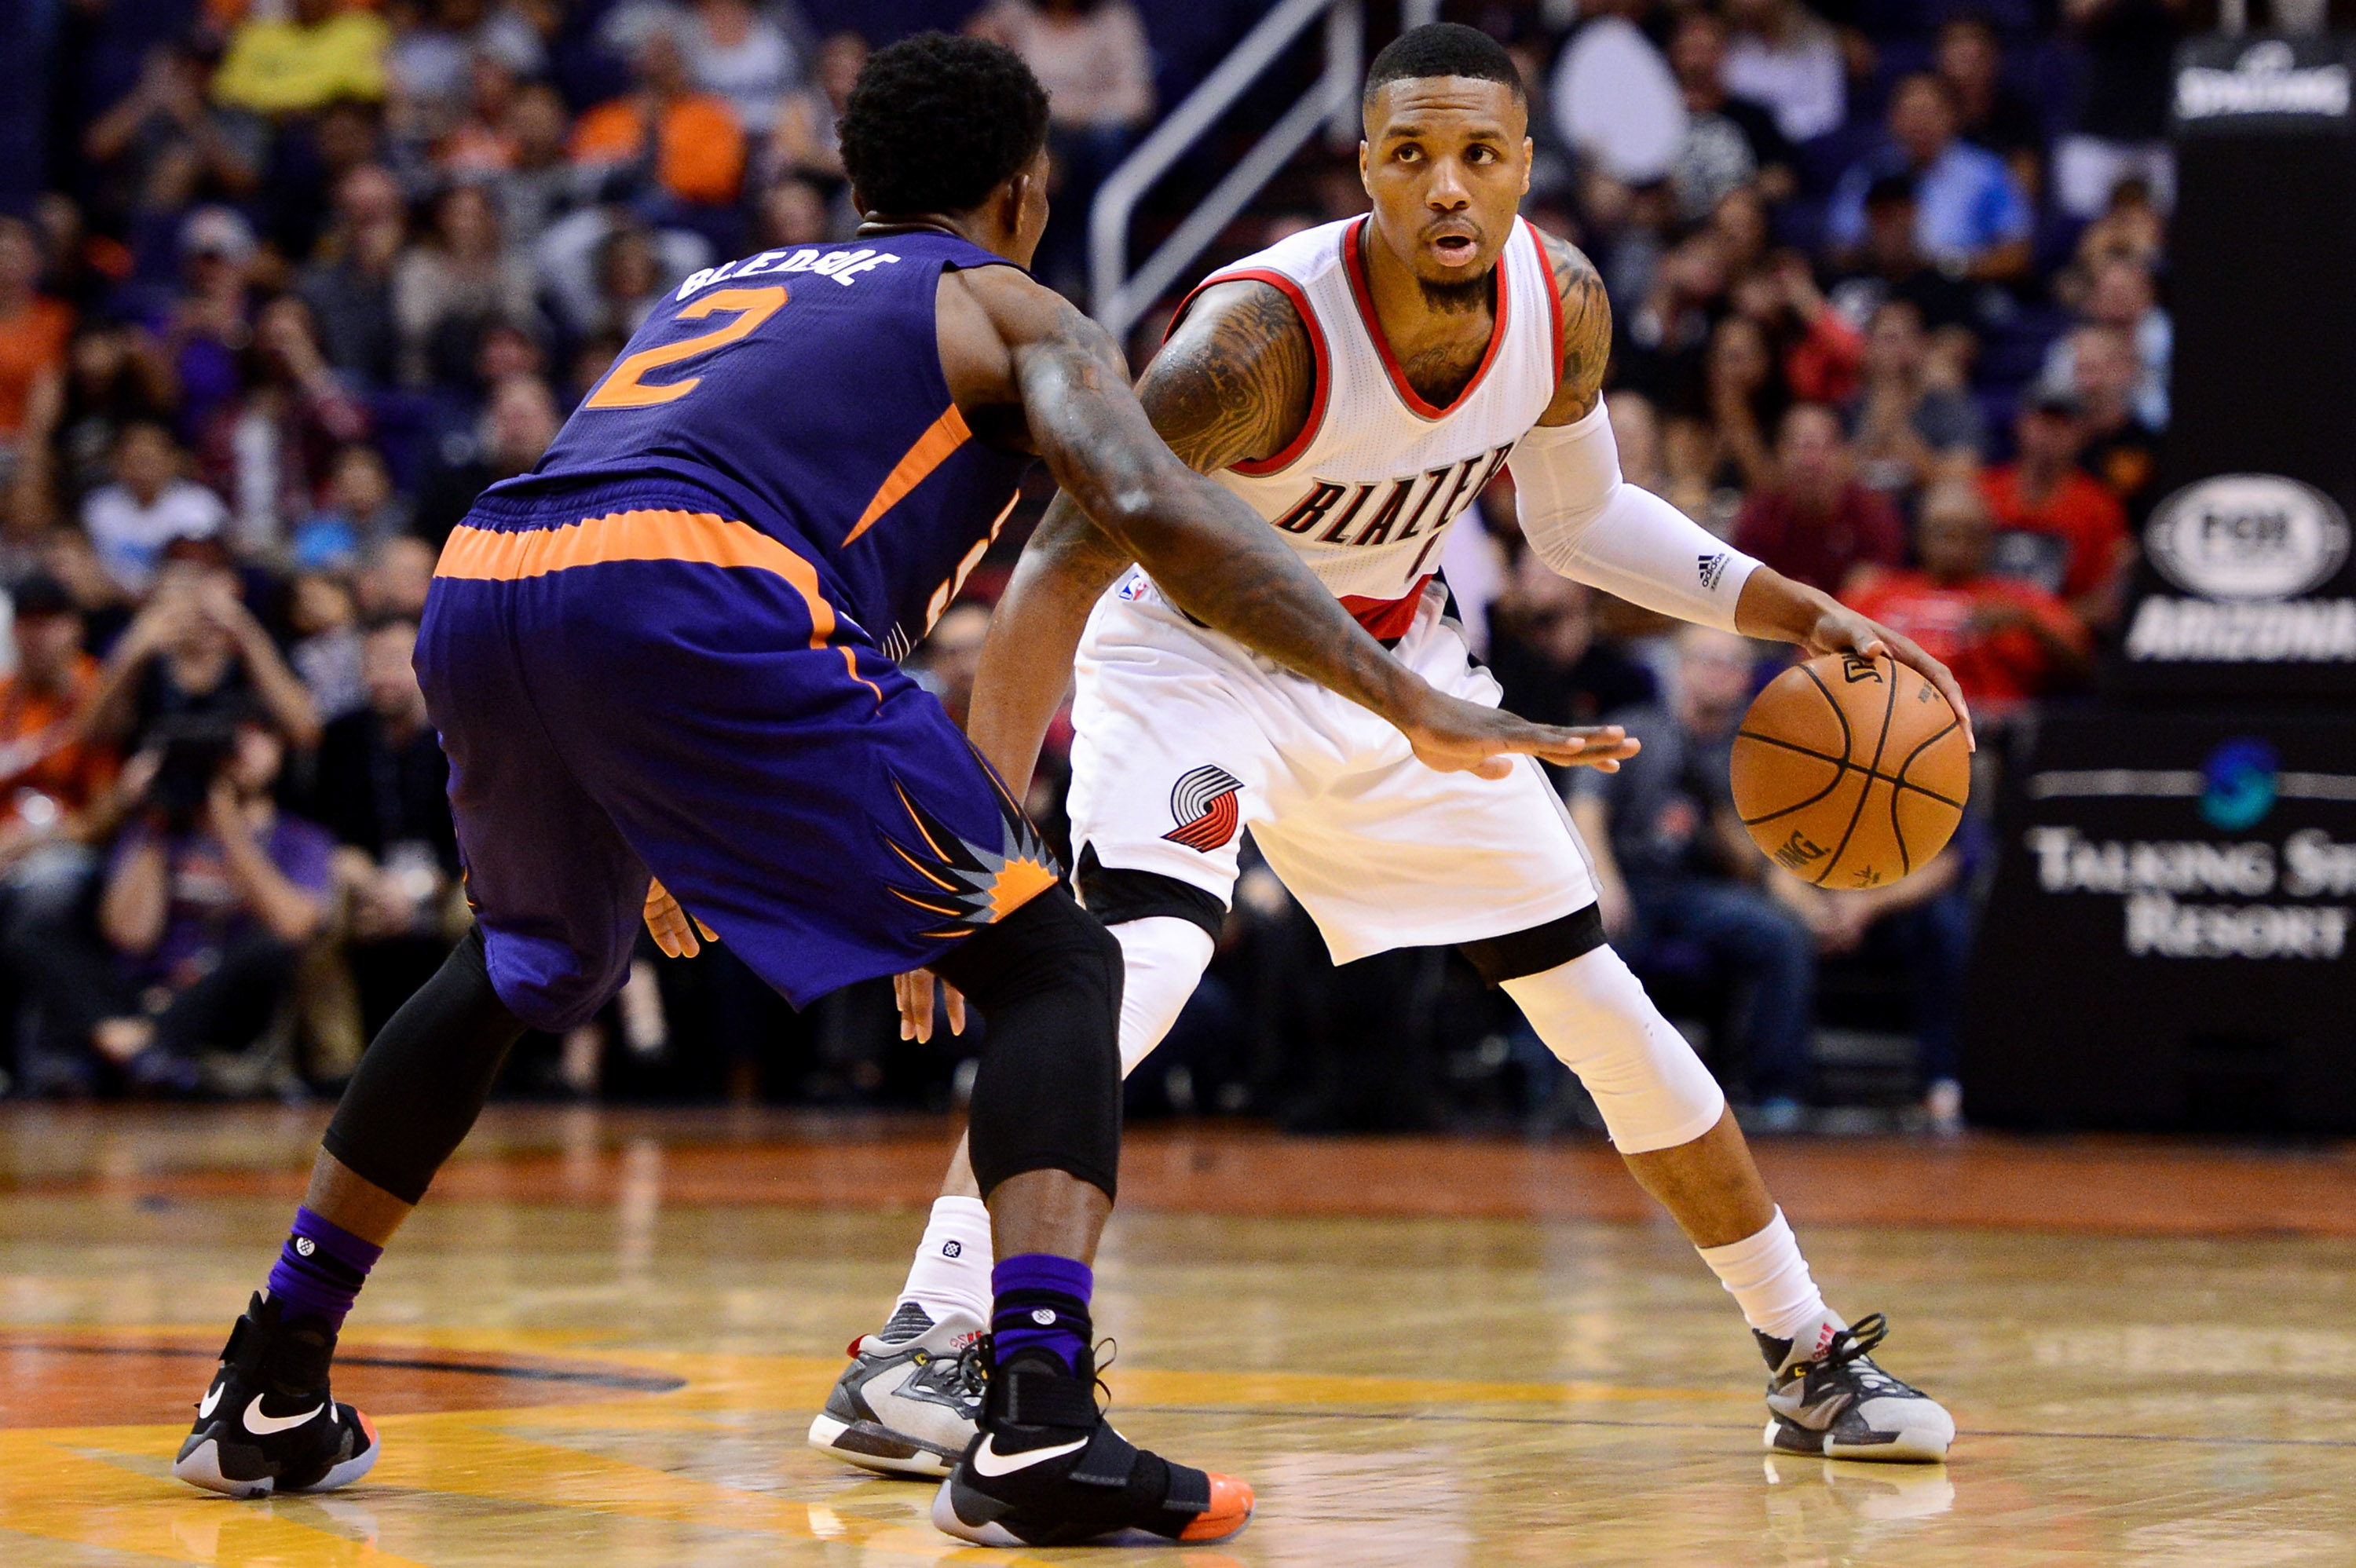 Suns at Trail Blazers live stream: How to watch online